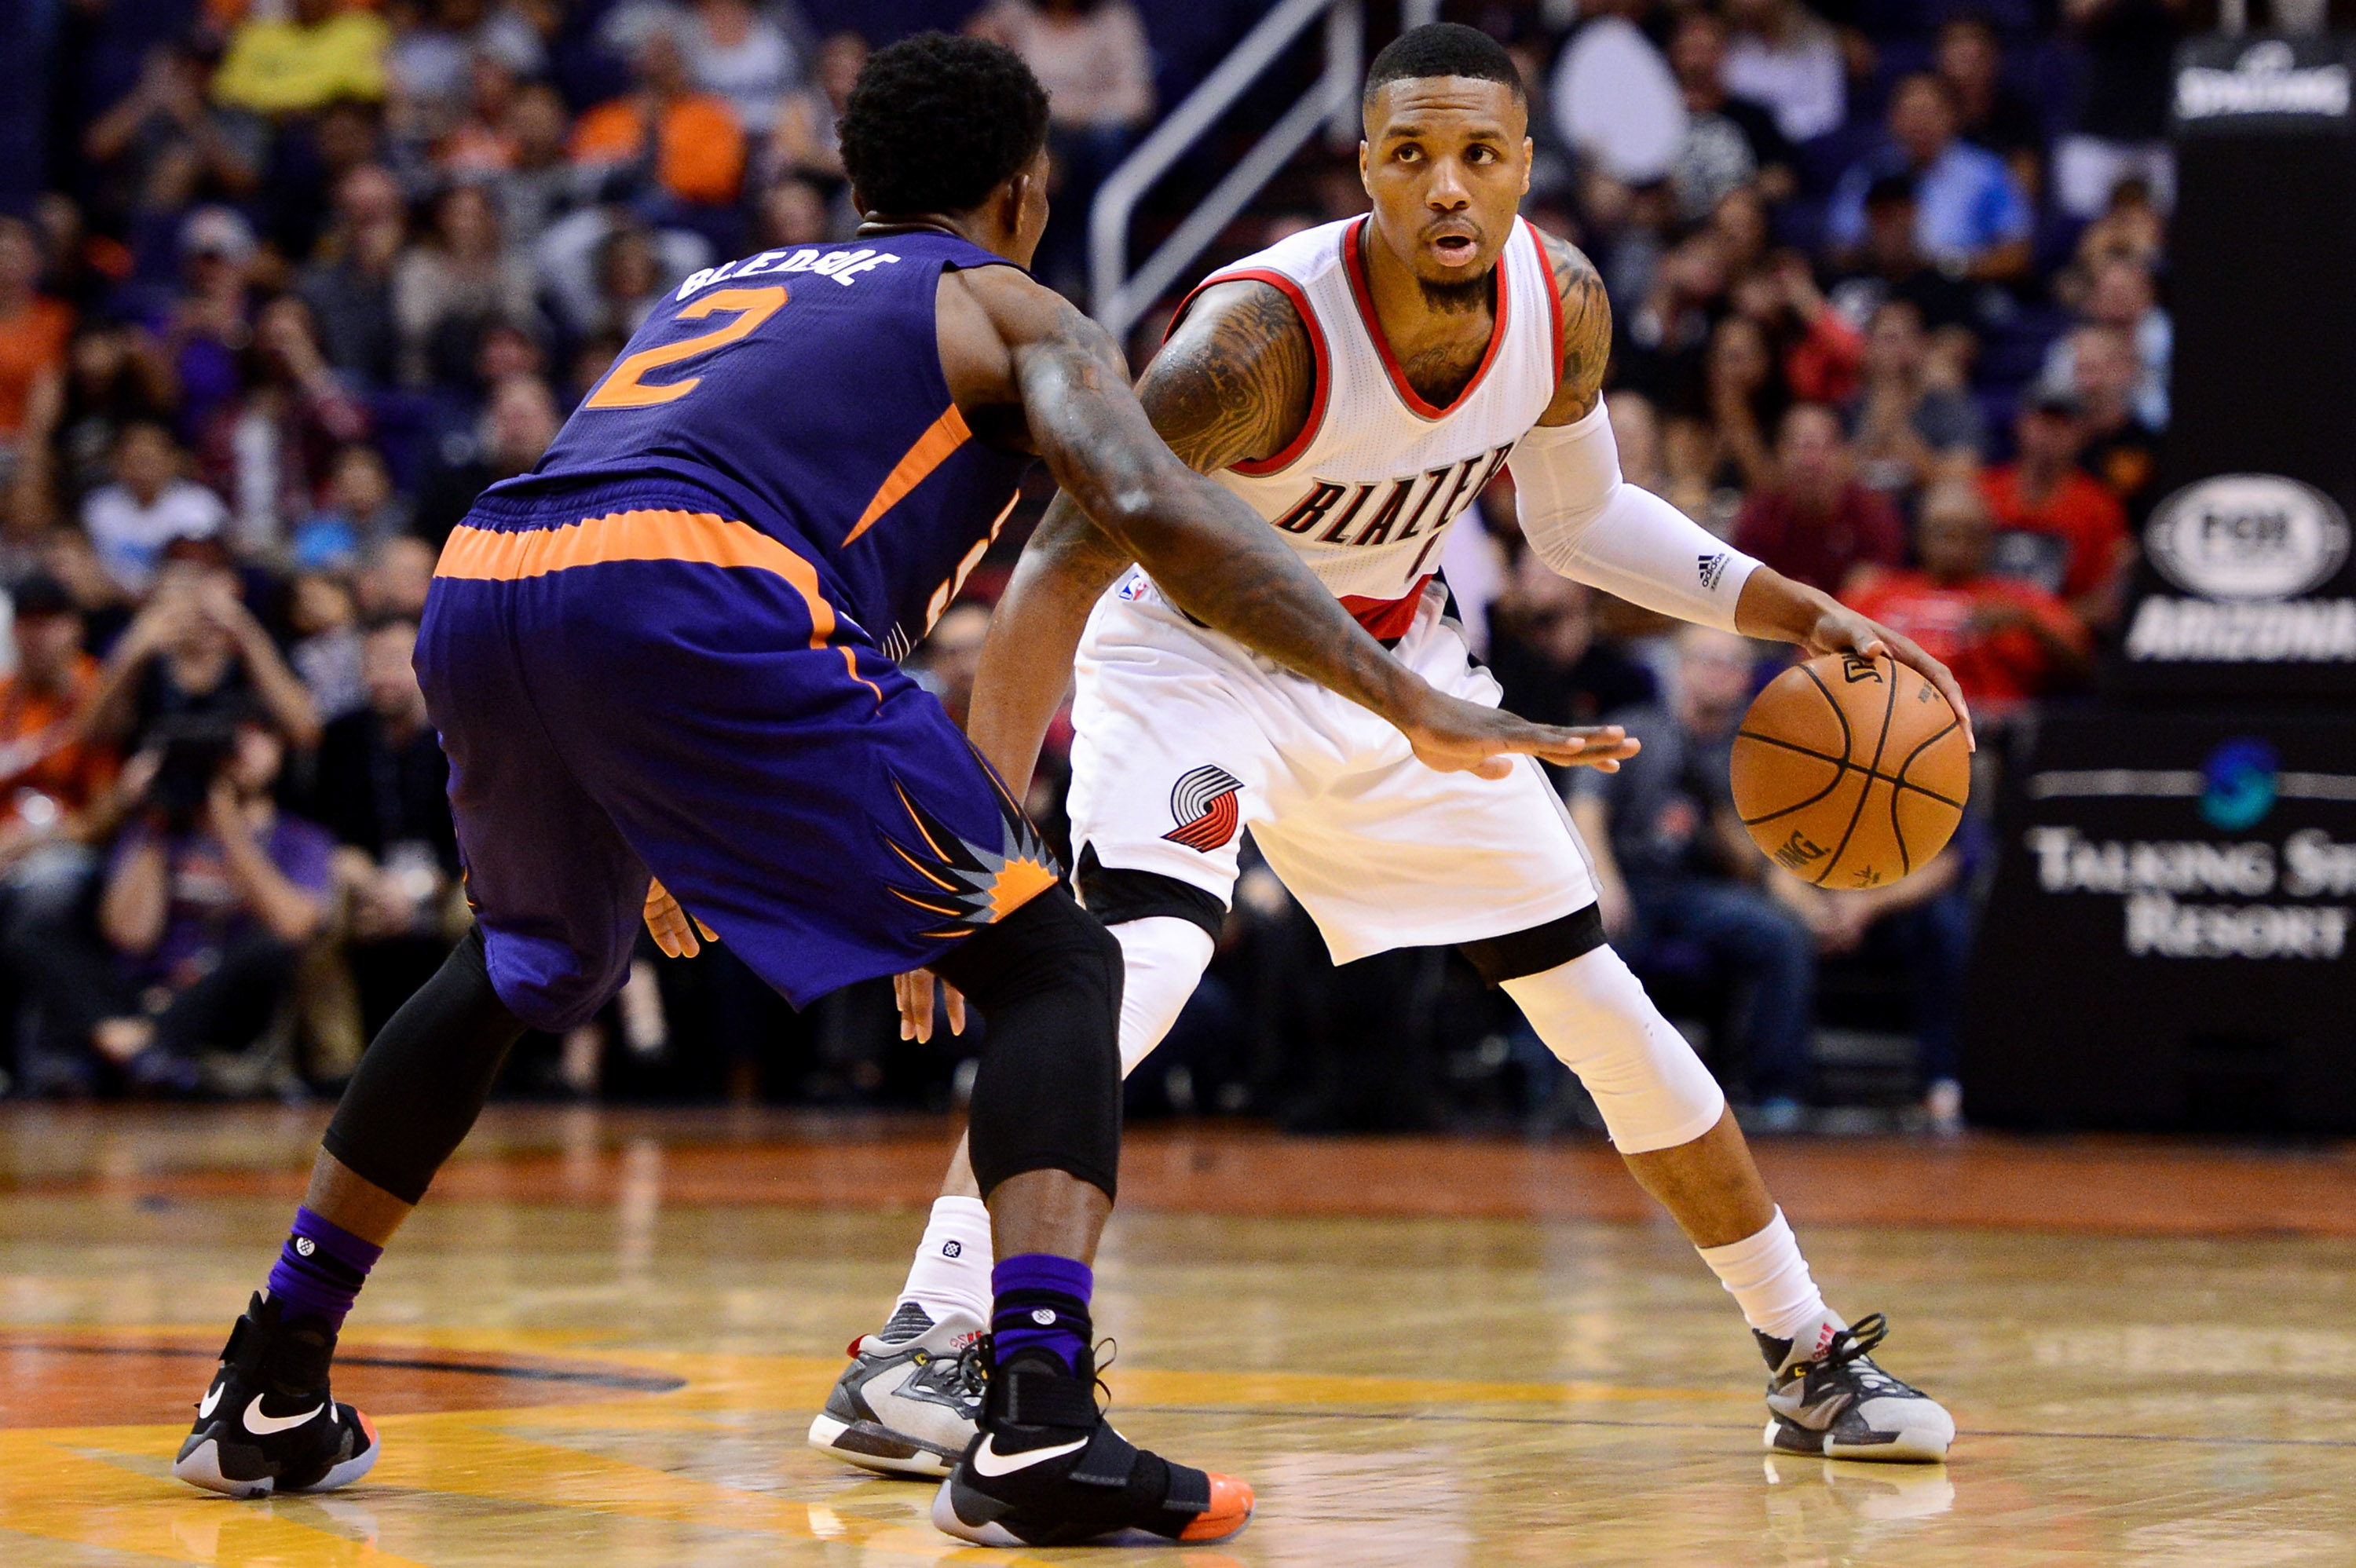 Suns at Trail Blazers live stream: How to watch online